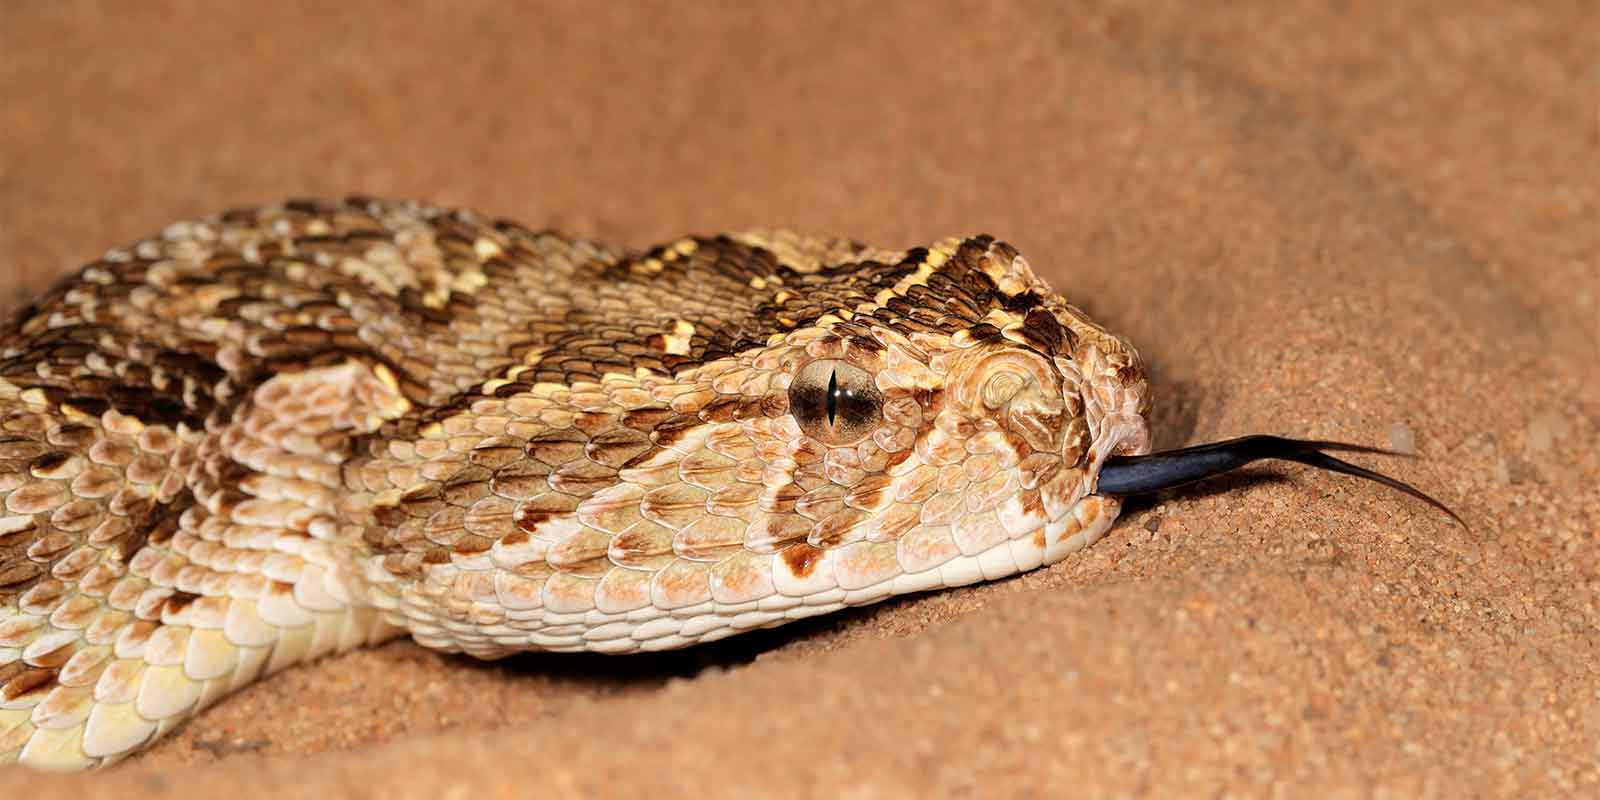 Puff adder in sand showing forked tongue